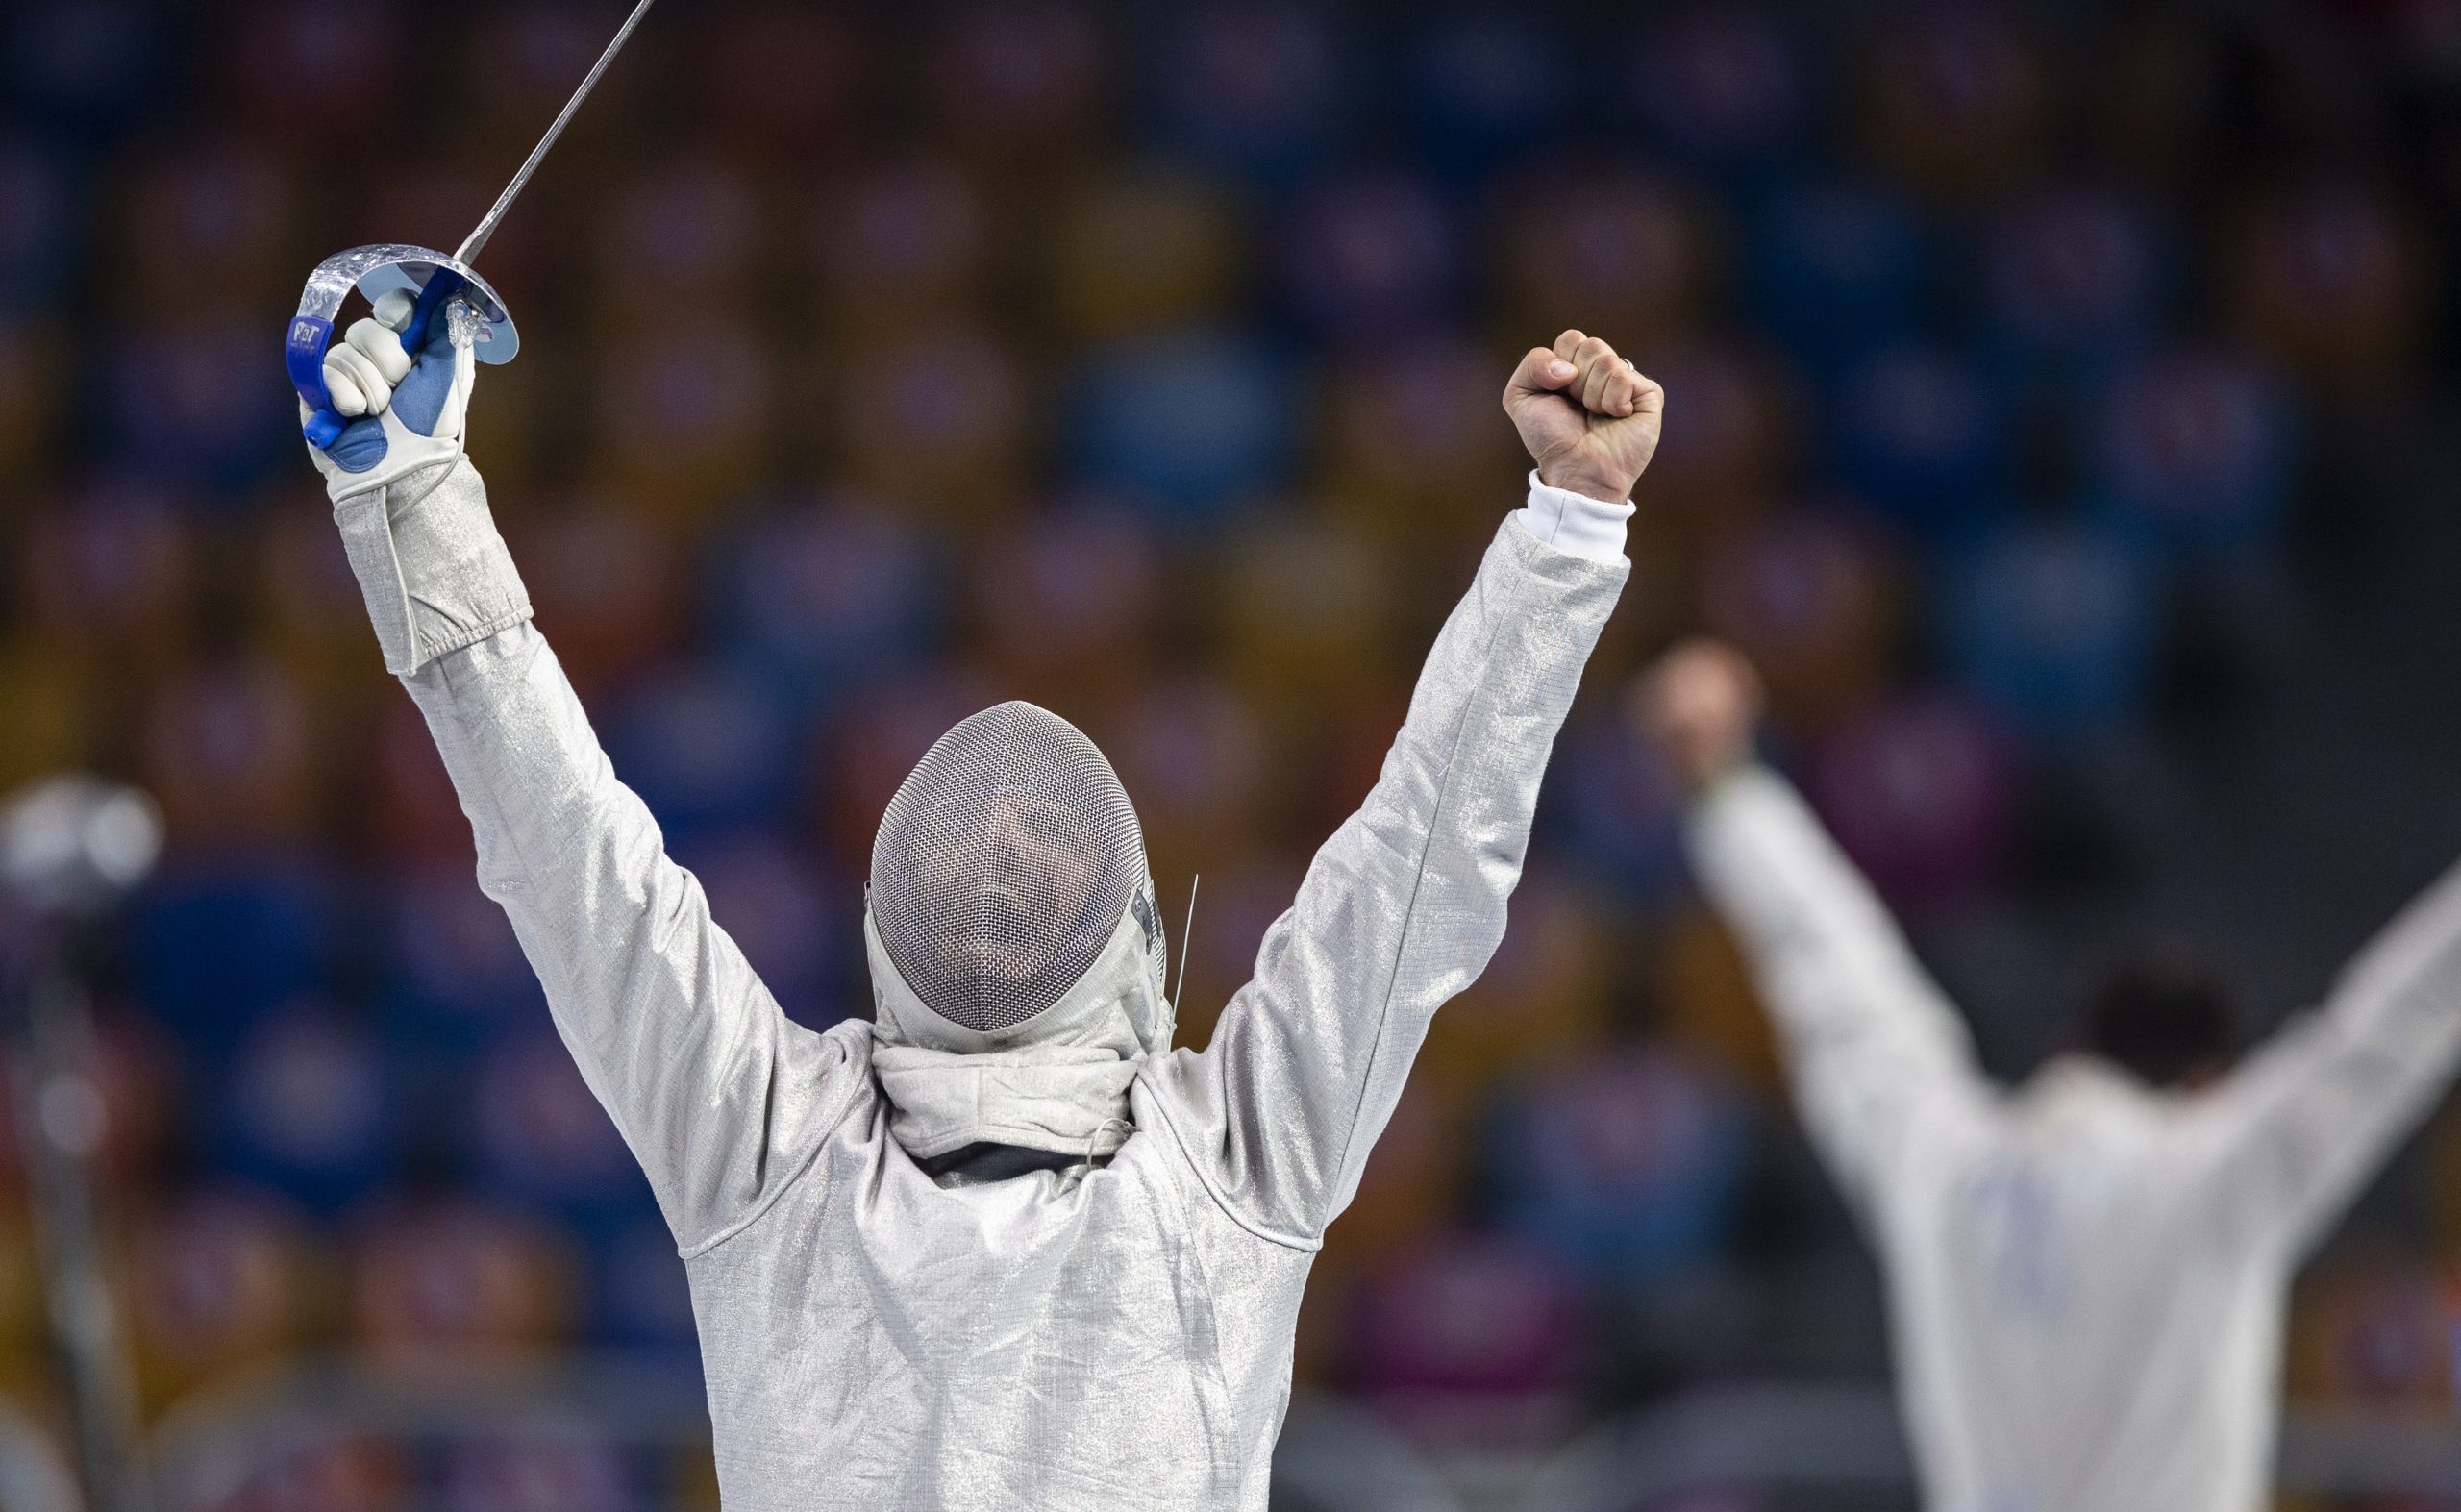 Fencing World Championships: Aaron Szilagyi wins gold medal in men's individual event